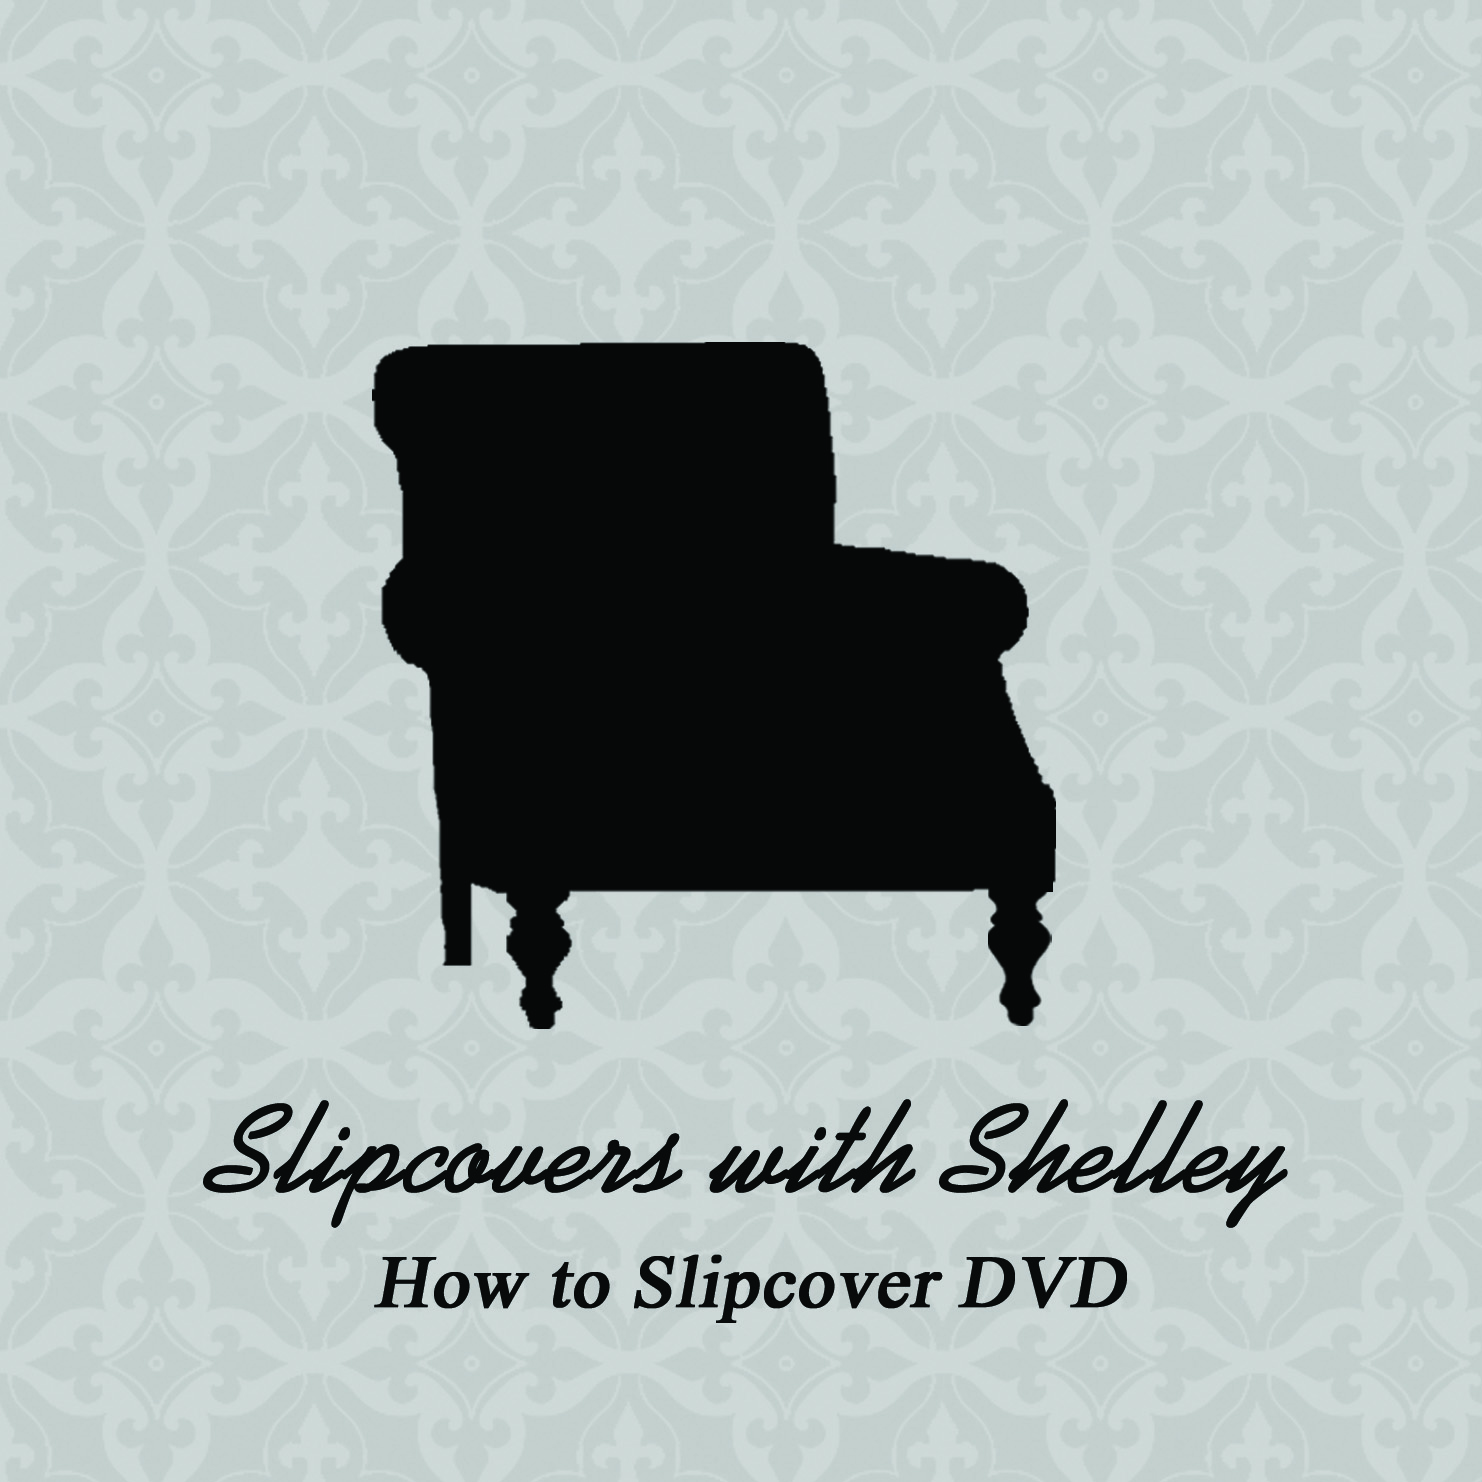 How To Slipcover Dvd Slipcovers By Shelley